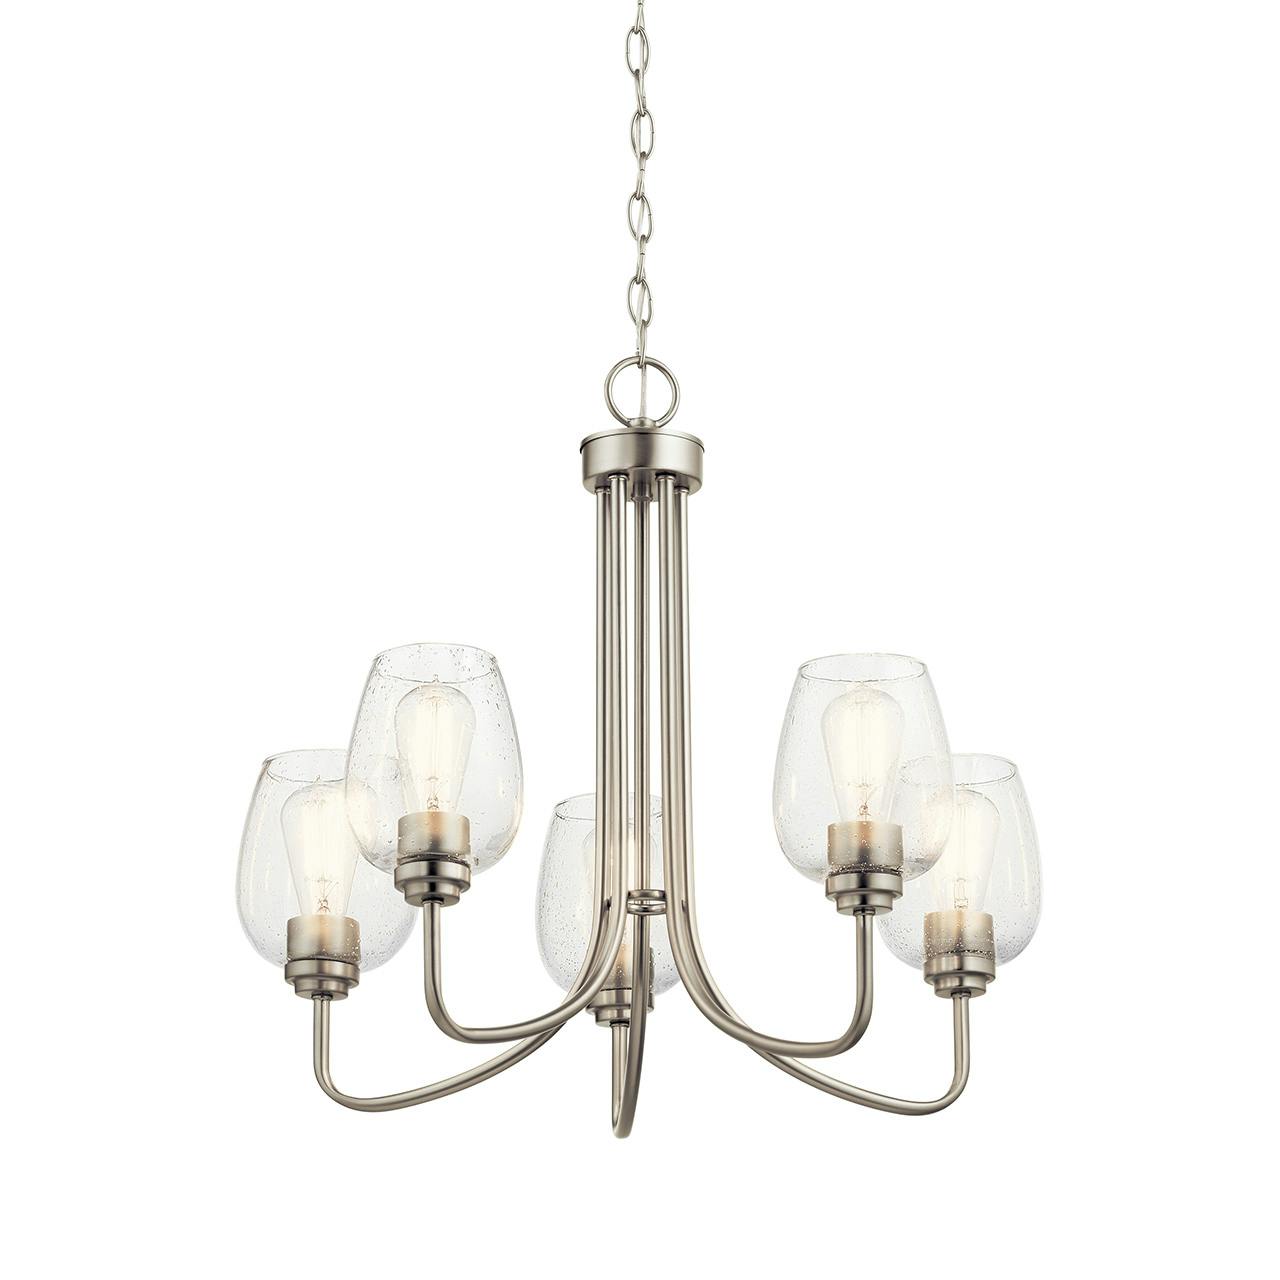 Valserrano 5 Light Chandelier Nickel without the canopy on a white background